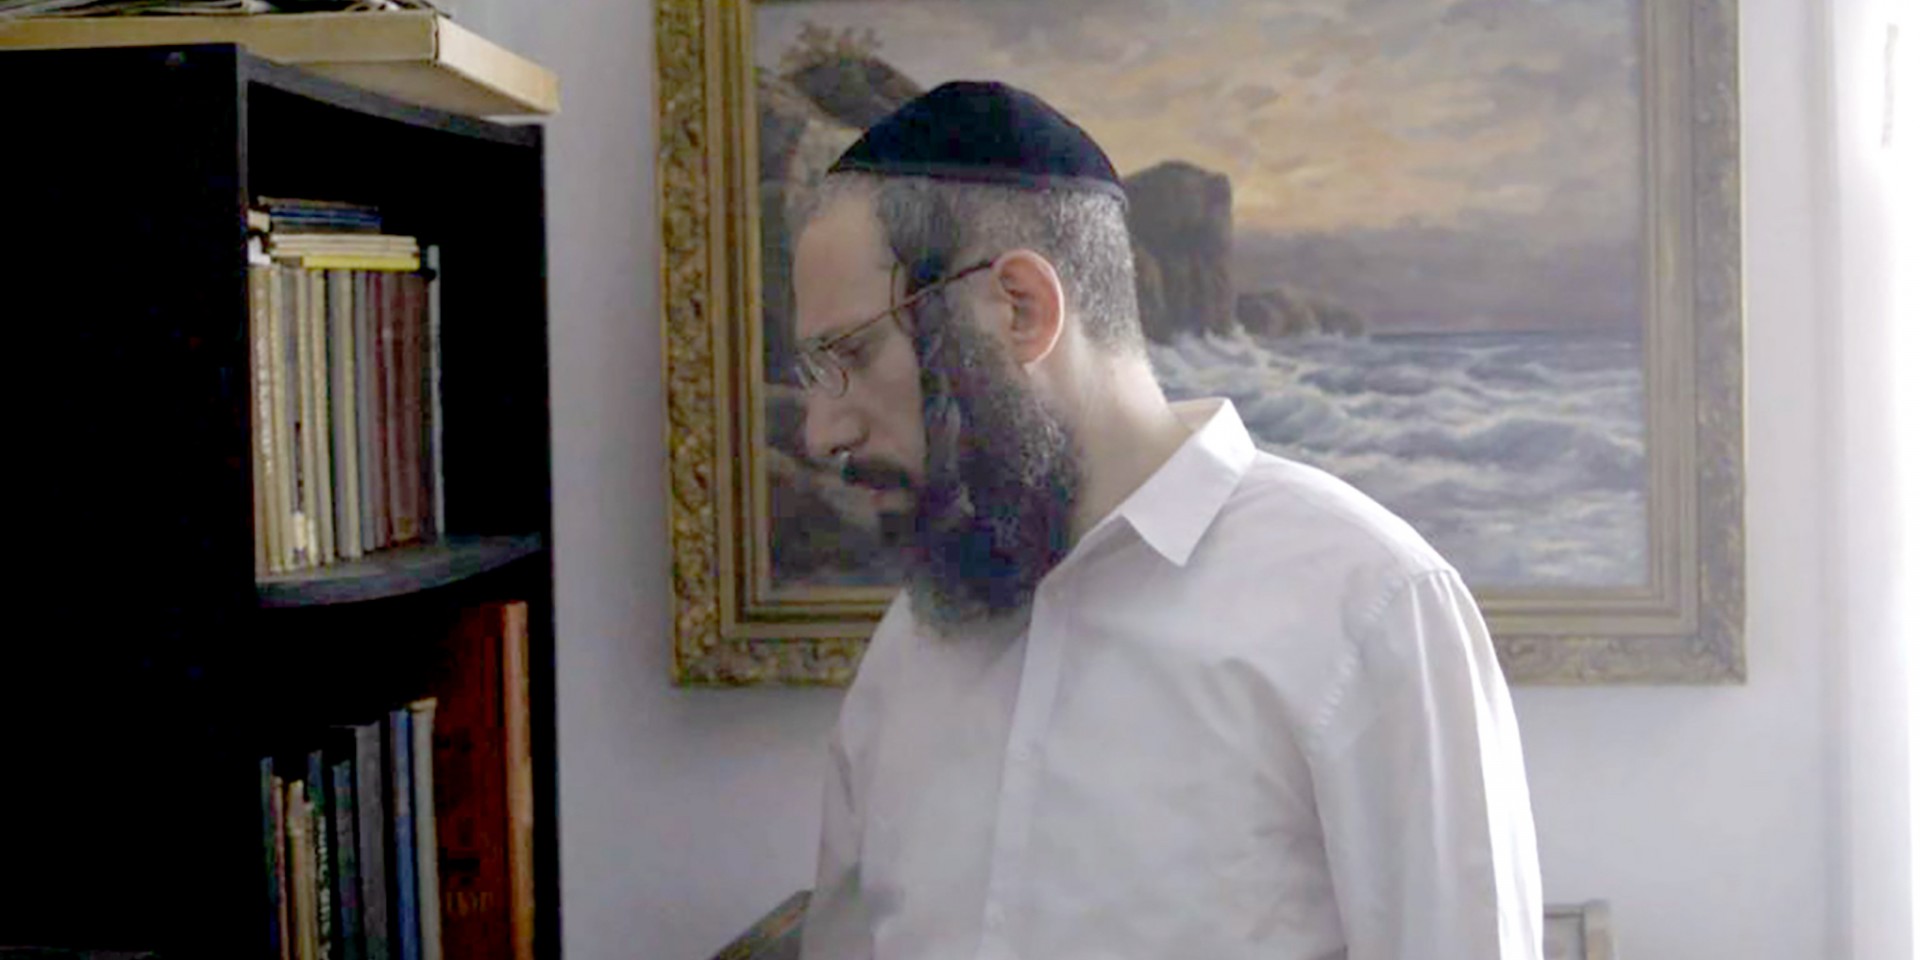 A Hasidic man standing in front of a bookshelf. 